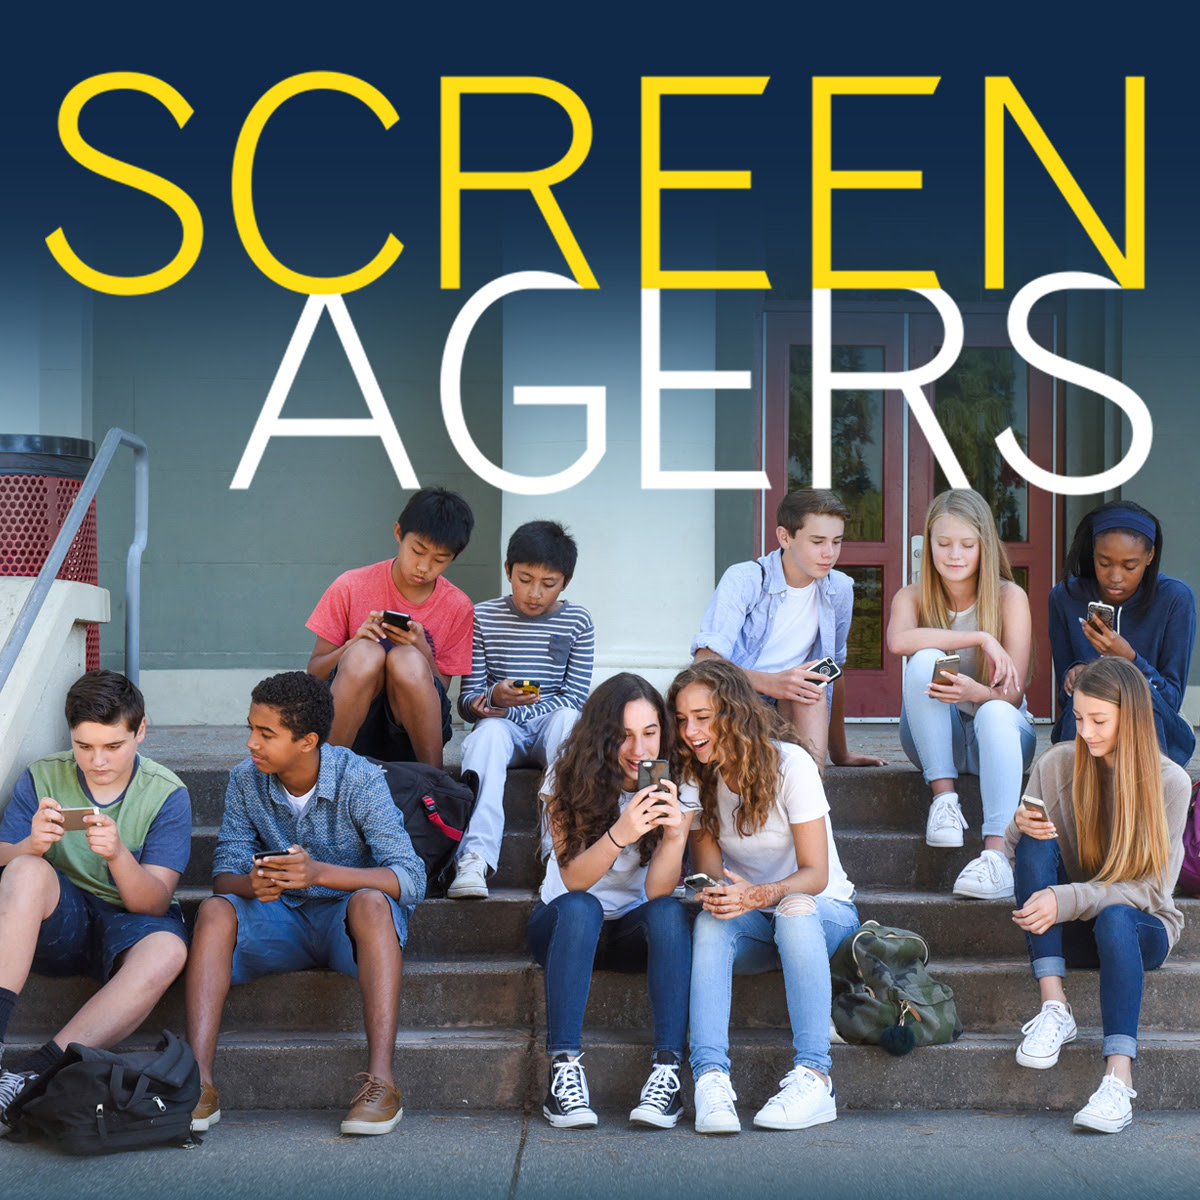 Screenagers Film Presented By Our Lady of Perpetual Help School PTO